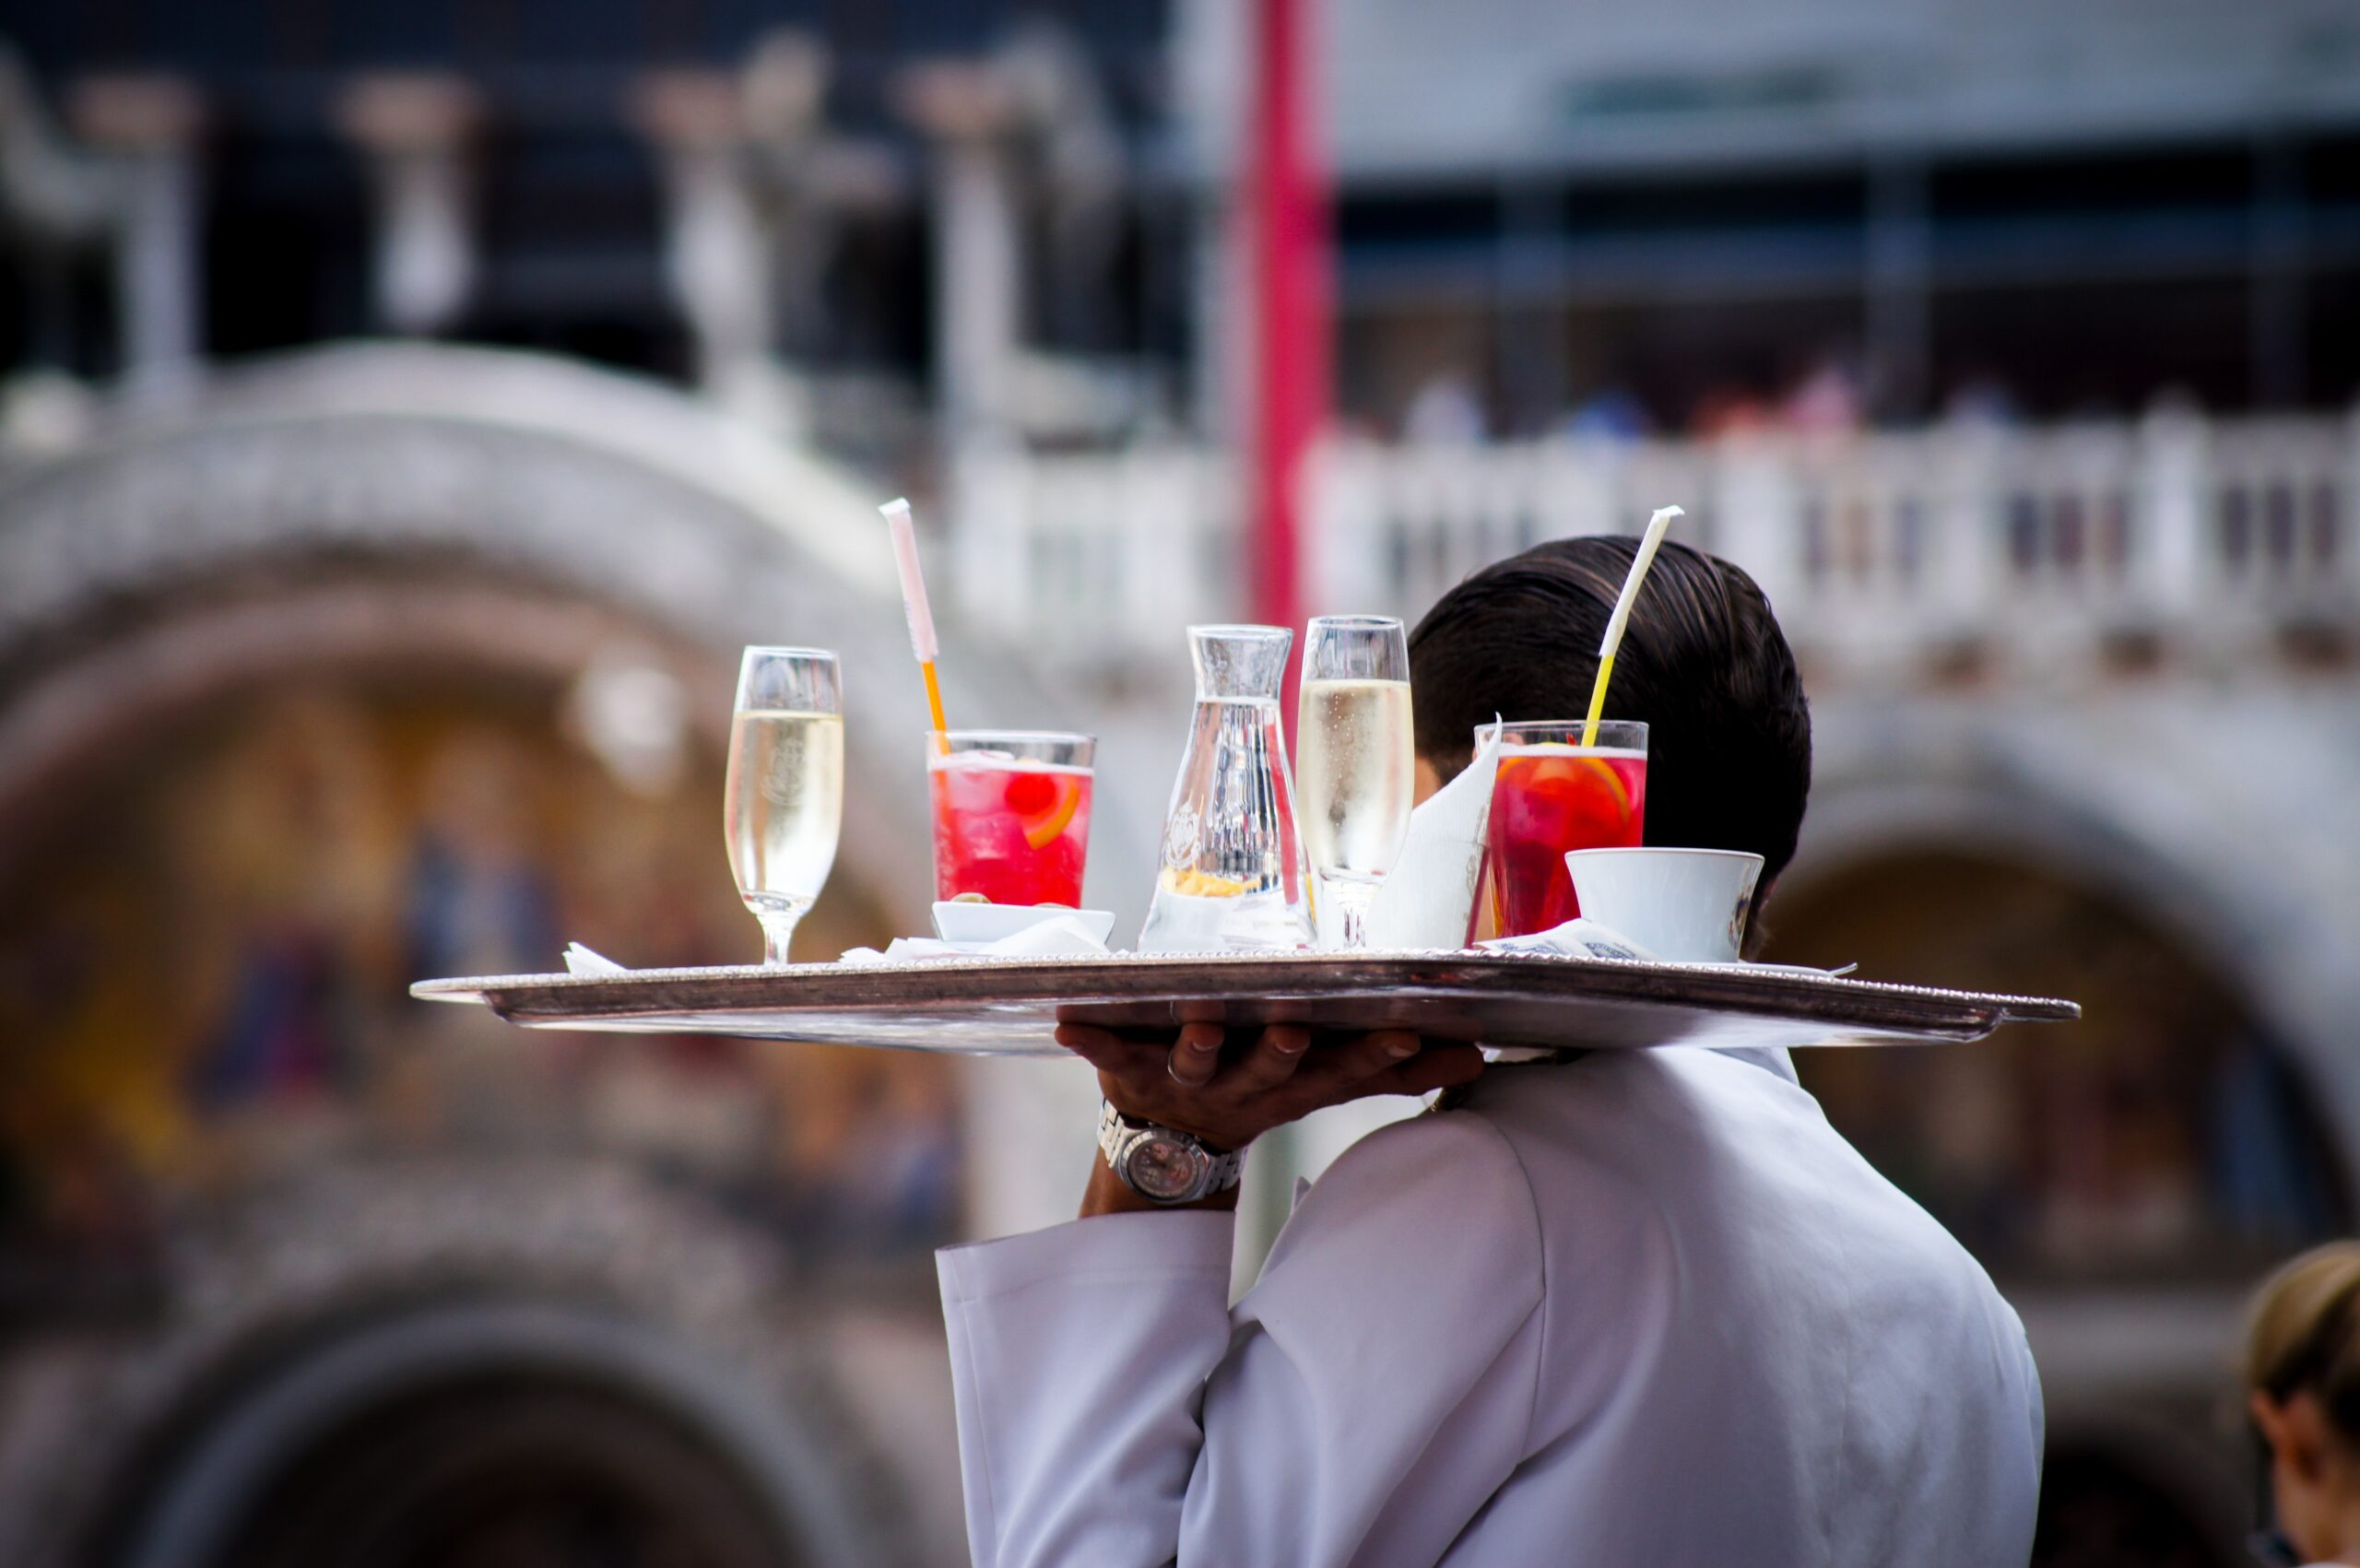 A waiter carries a tray of drinks. Elevate your staff with custom uniforms from Stamford Uniform and Linen.